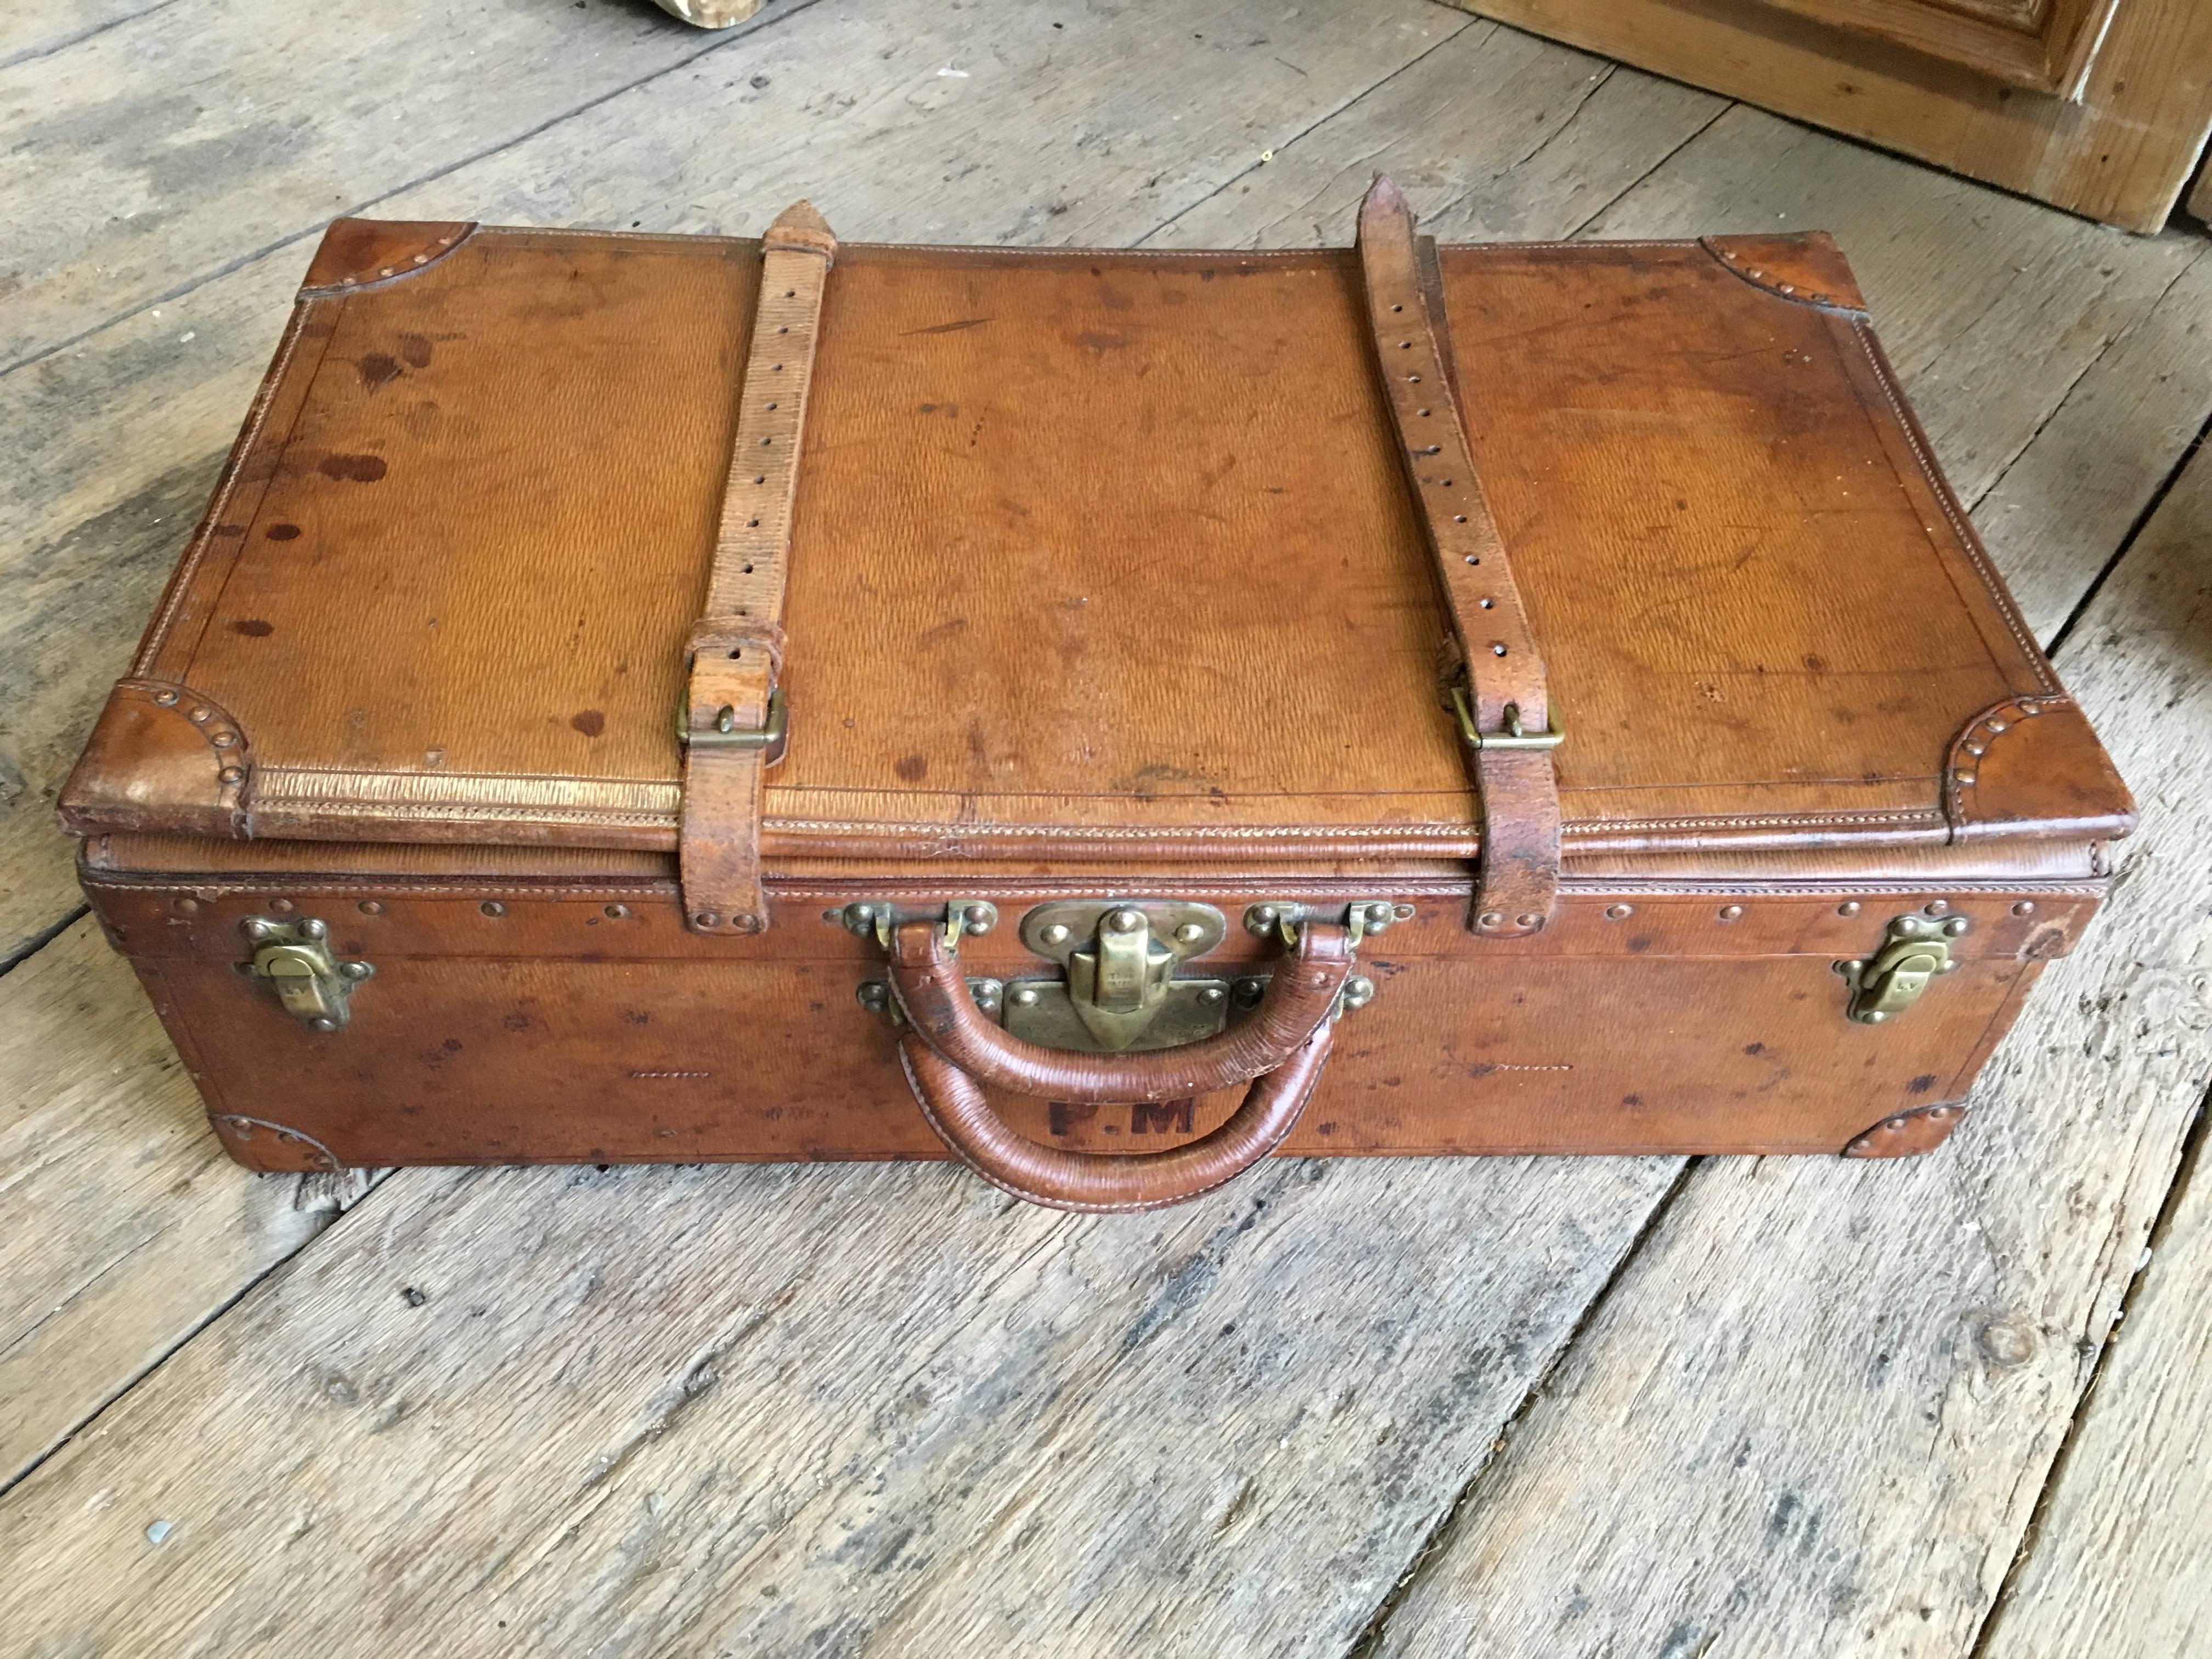 A rare Louis Vuitton "Malle Cabine" expanding suitcase, circa 1910, formerly owned my Pierre Moulin, founder of the Pierre Deux shops, monogrammed with "PM" below the double handles. Great condition with expected wear. The